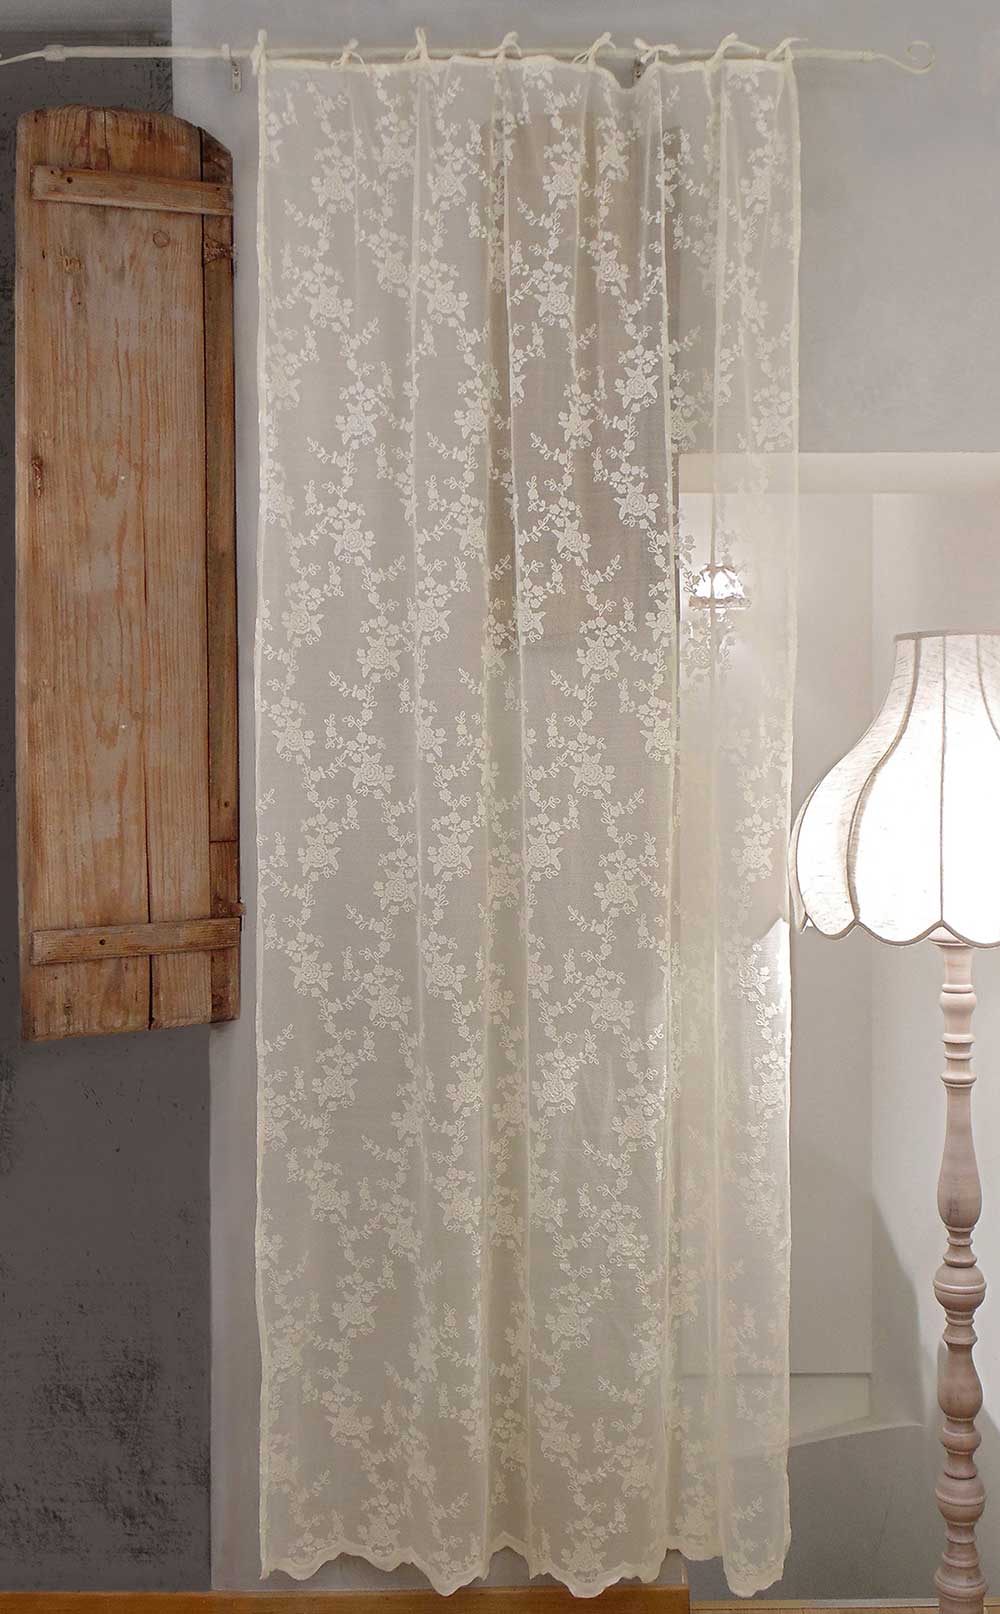 Shabby Chic Poly-Ciel Collection Polyester-Spitzenvorhang 140 x 290 Elfenbeinfarbe